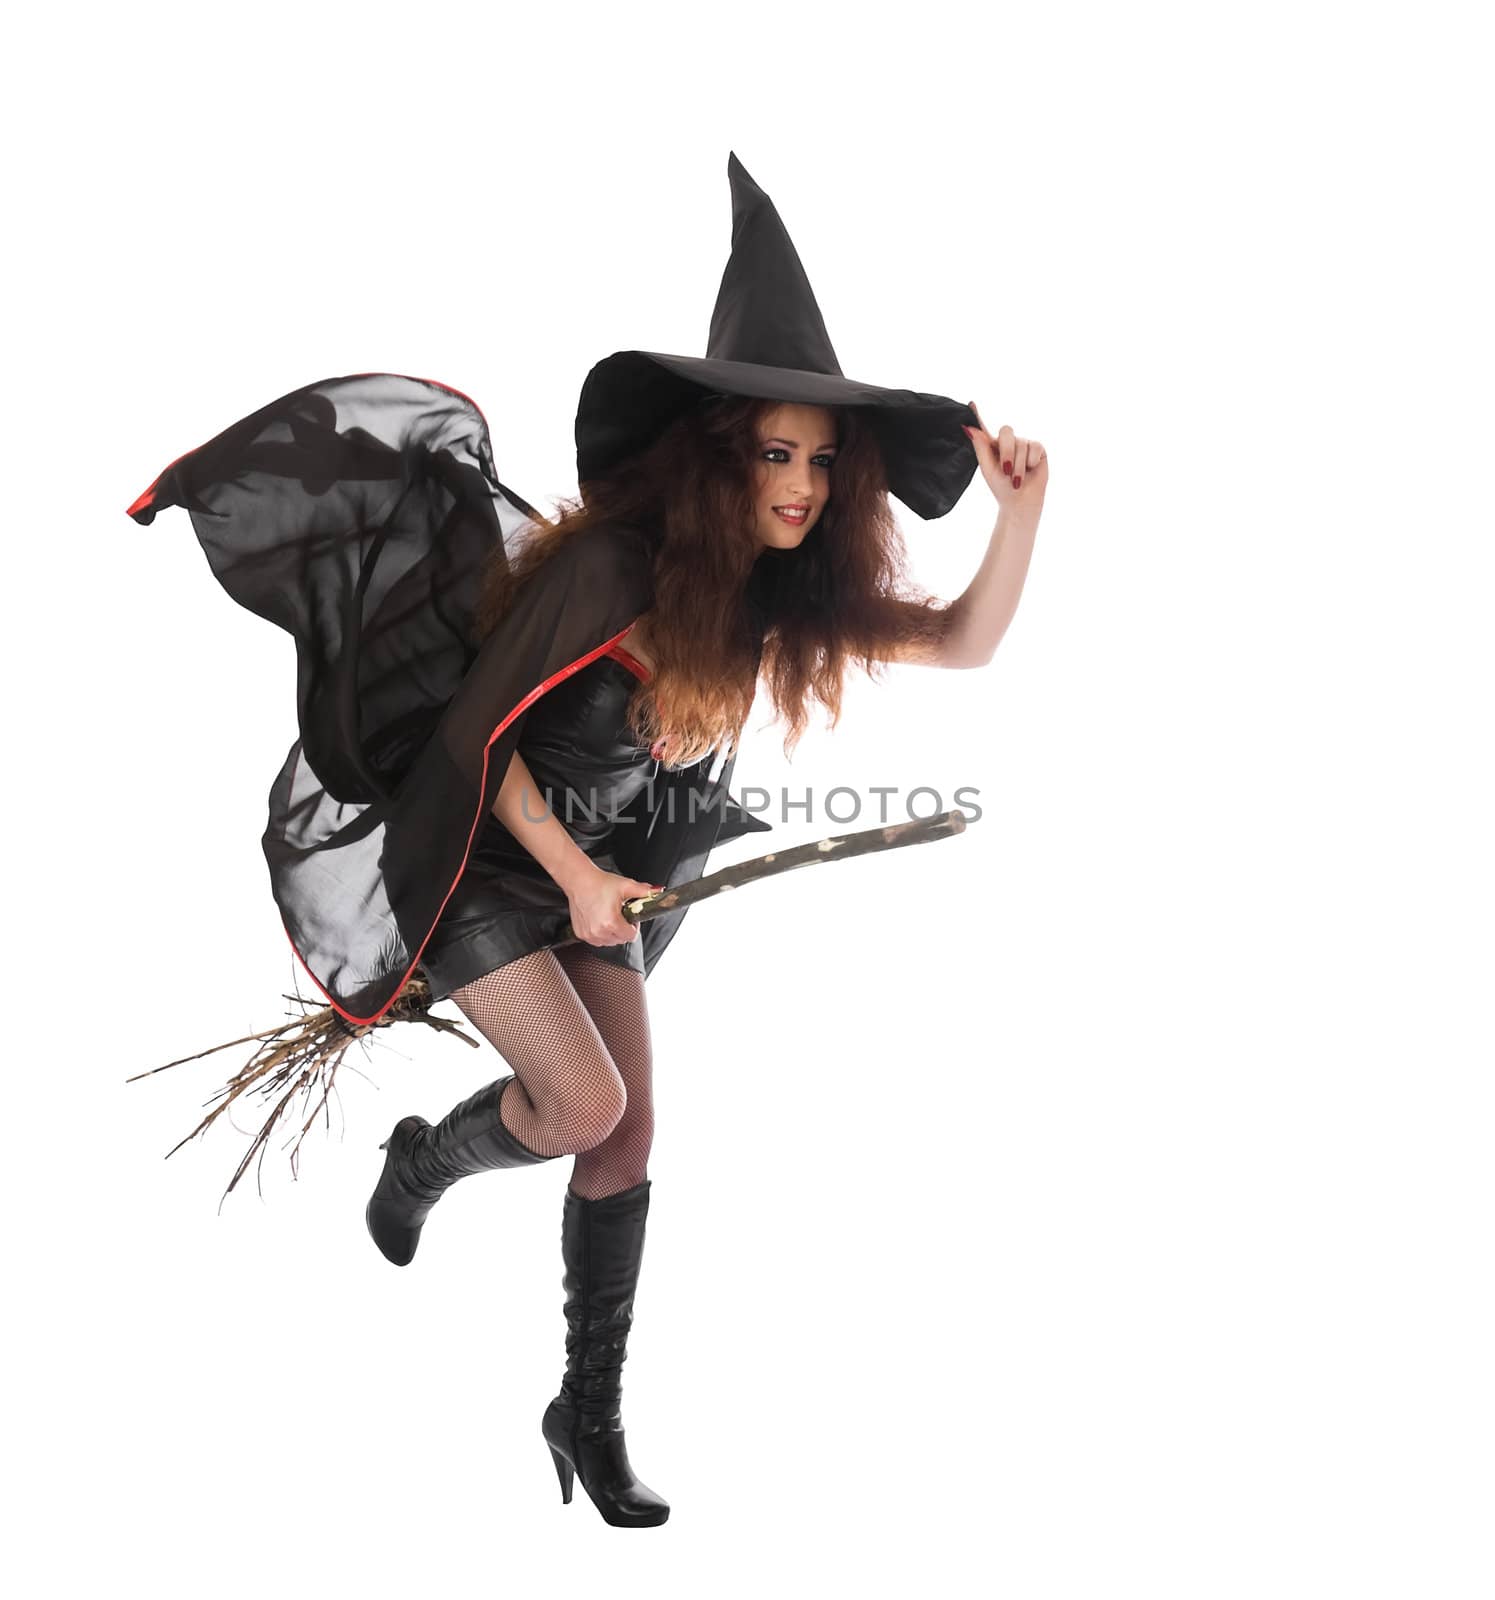 Halloween witch flying on broom. Isolated